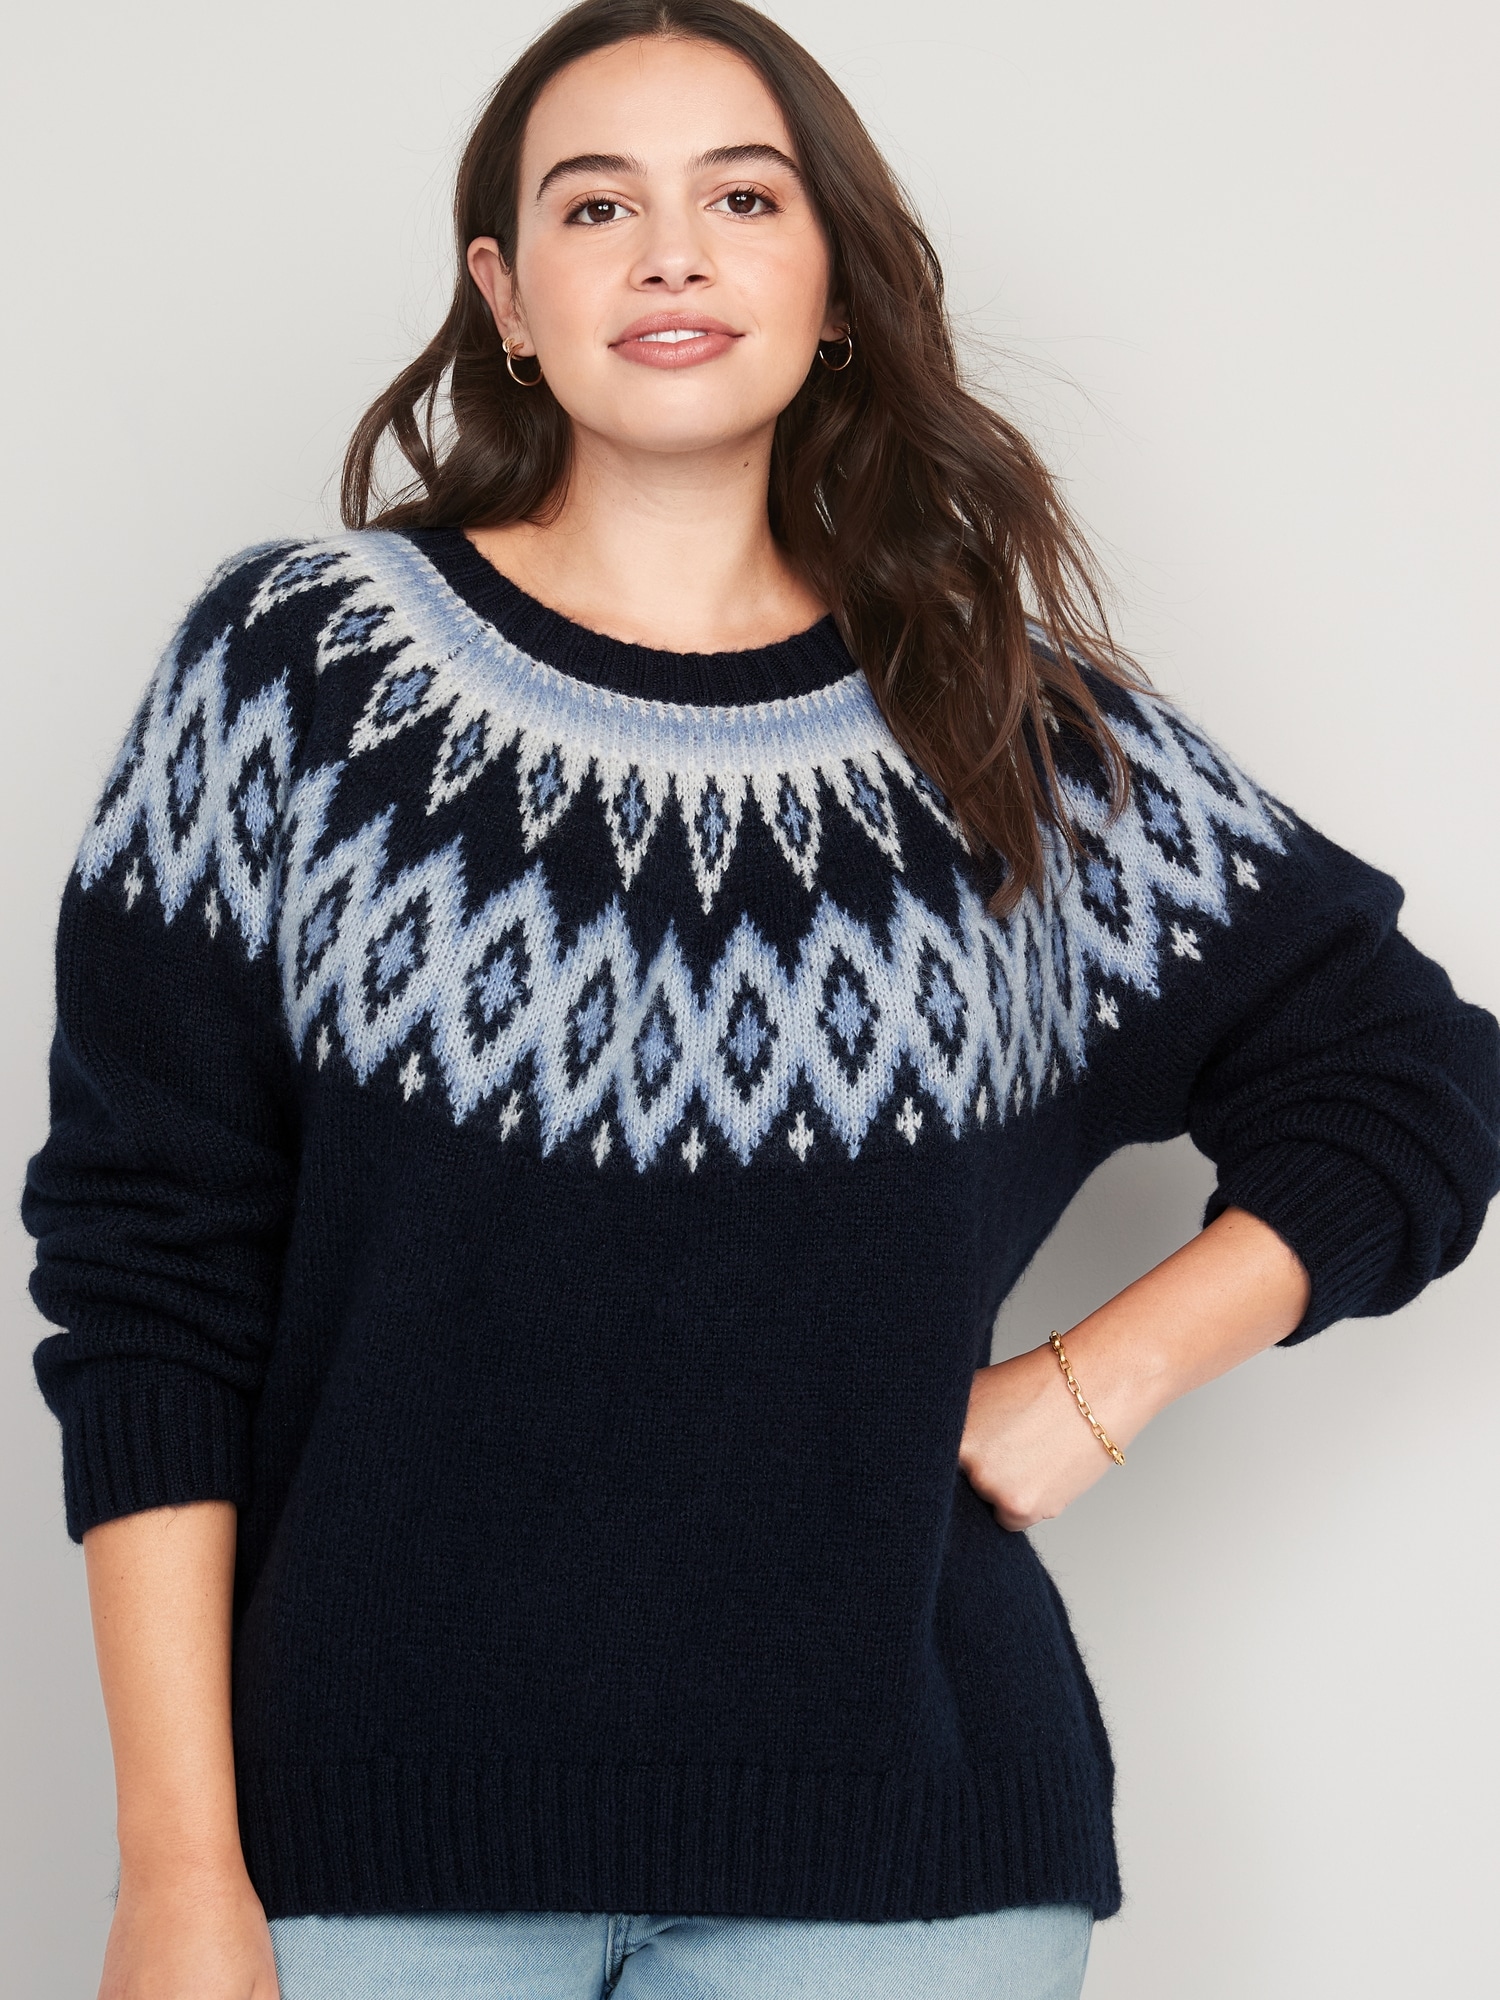 Fair Isle Cozy Shaker-Stitch Pullover Sweater for Women | Old Navy